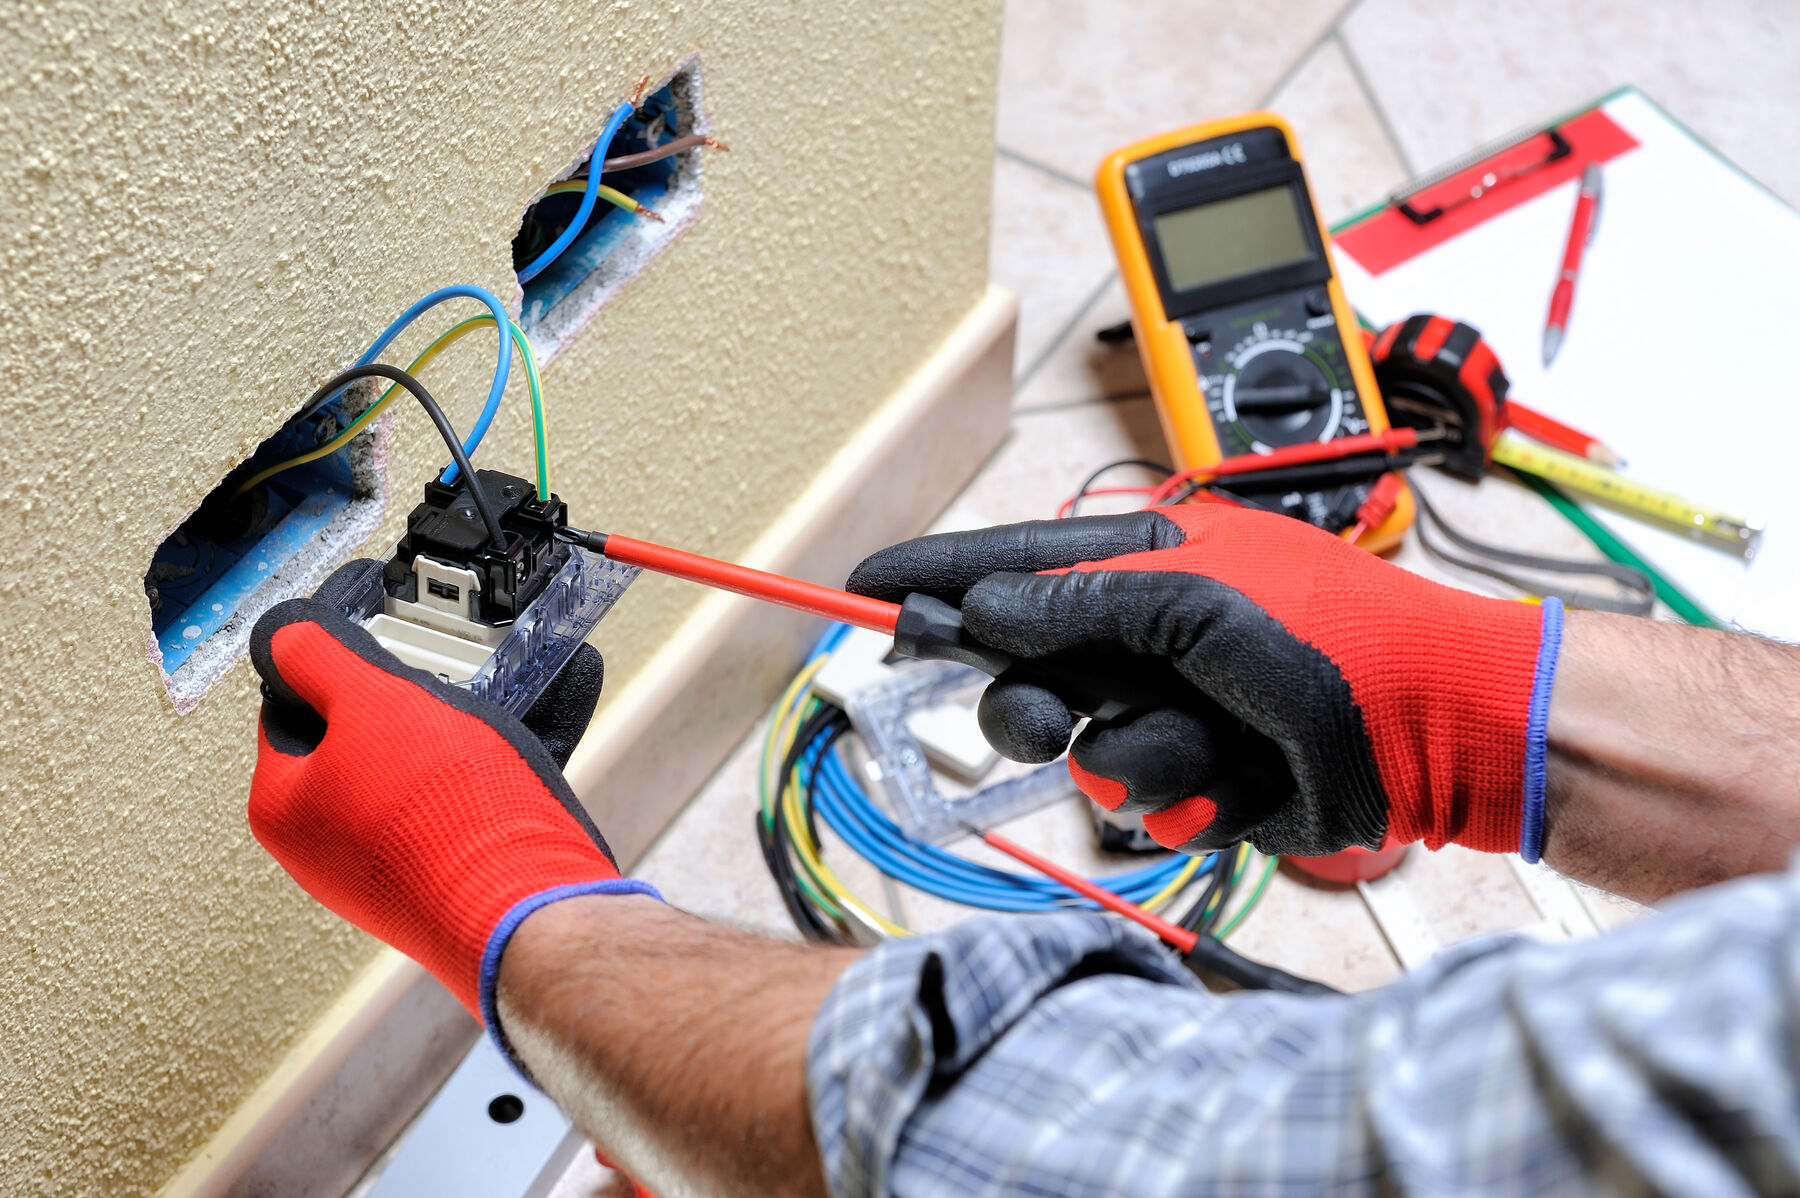 What Are the Benefits of Electrical and Plumbing Systems?